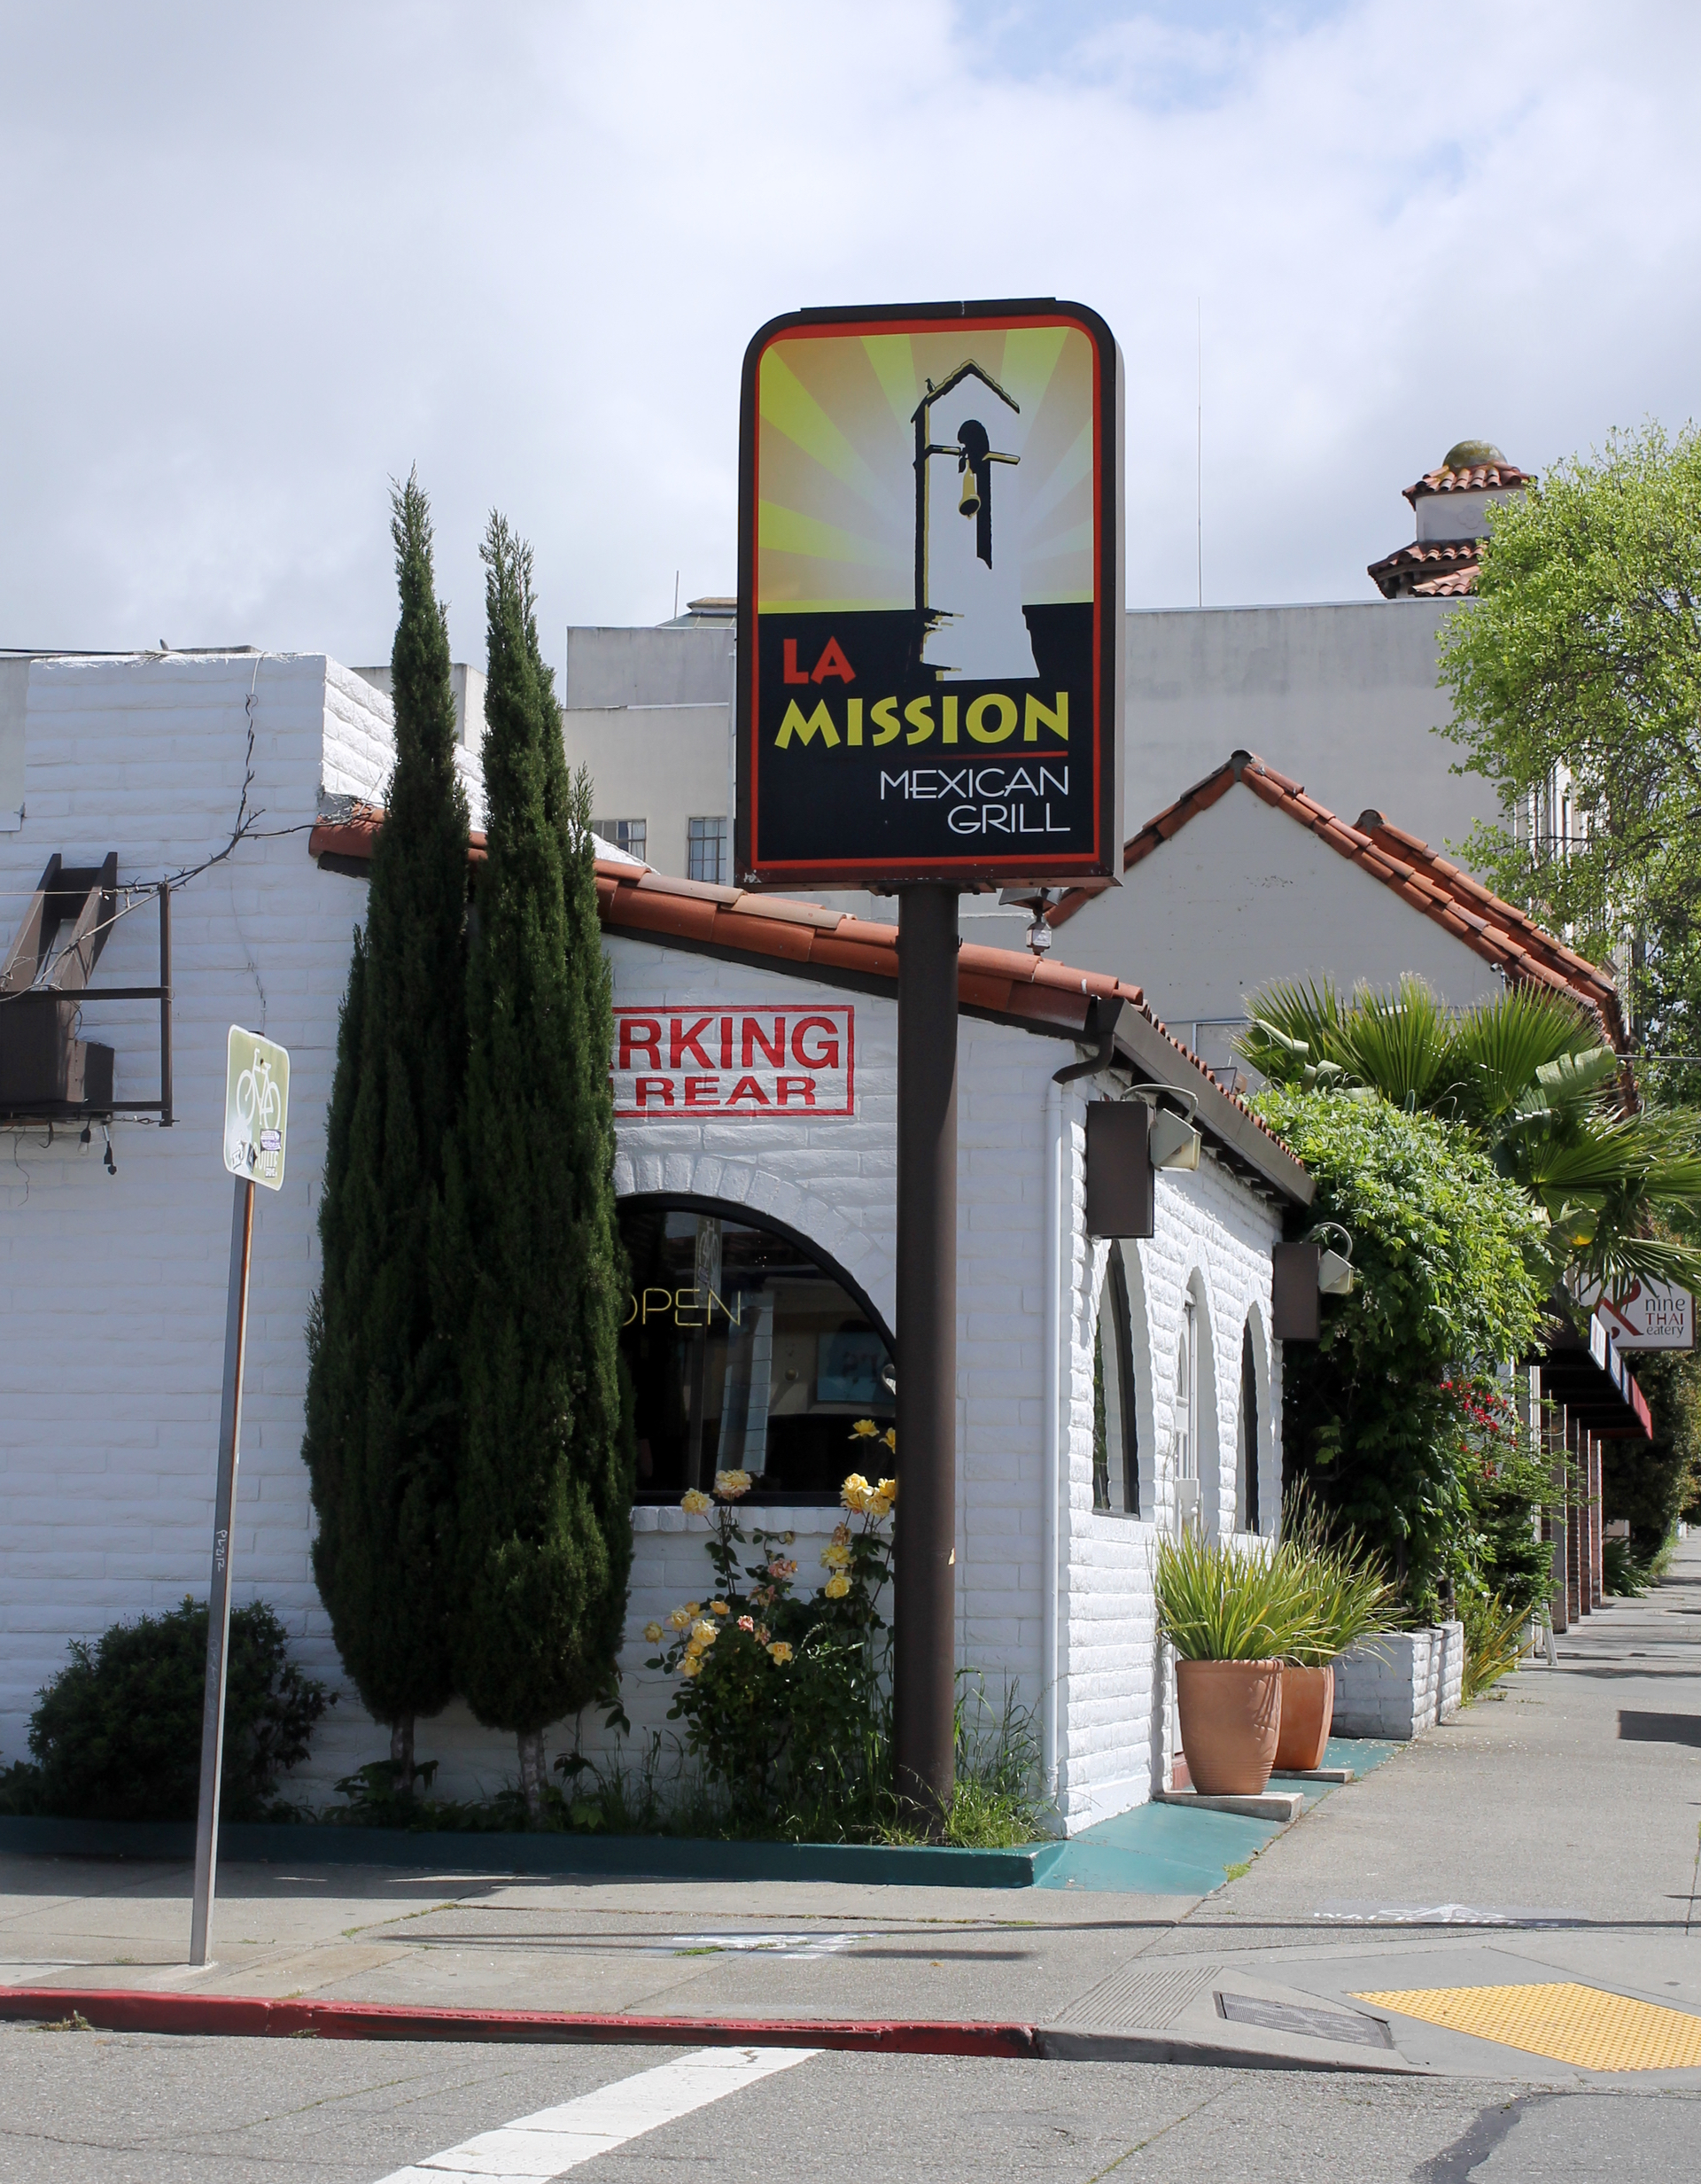 La Mission is located in a former Taco Bell on Berkeley’s University Avenue.